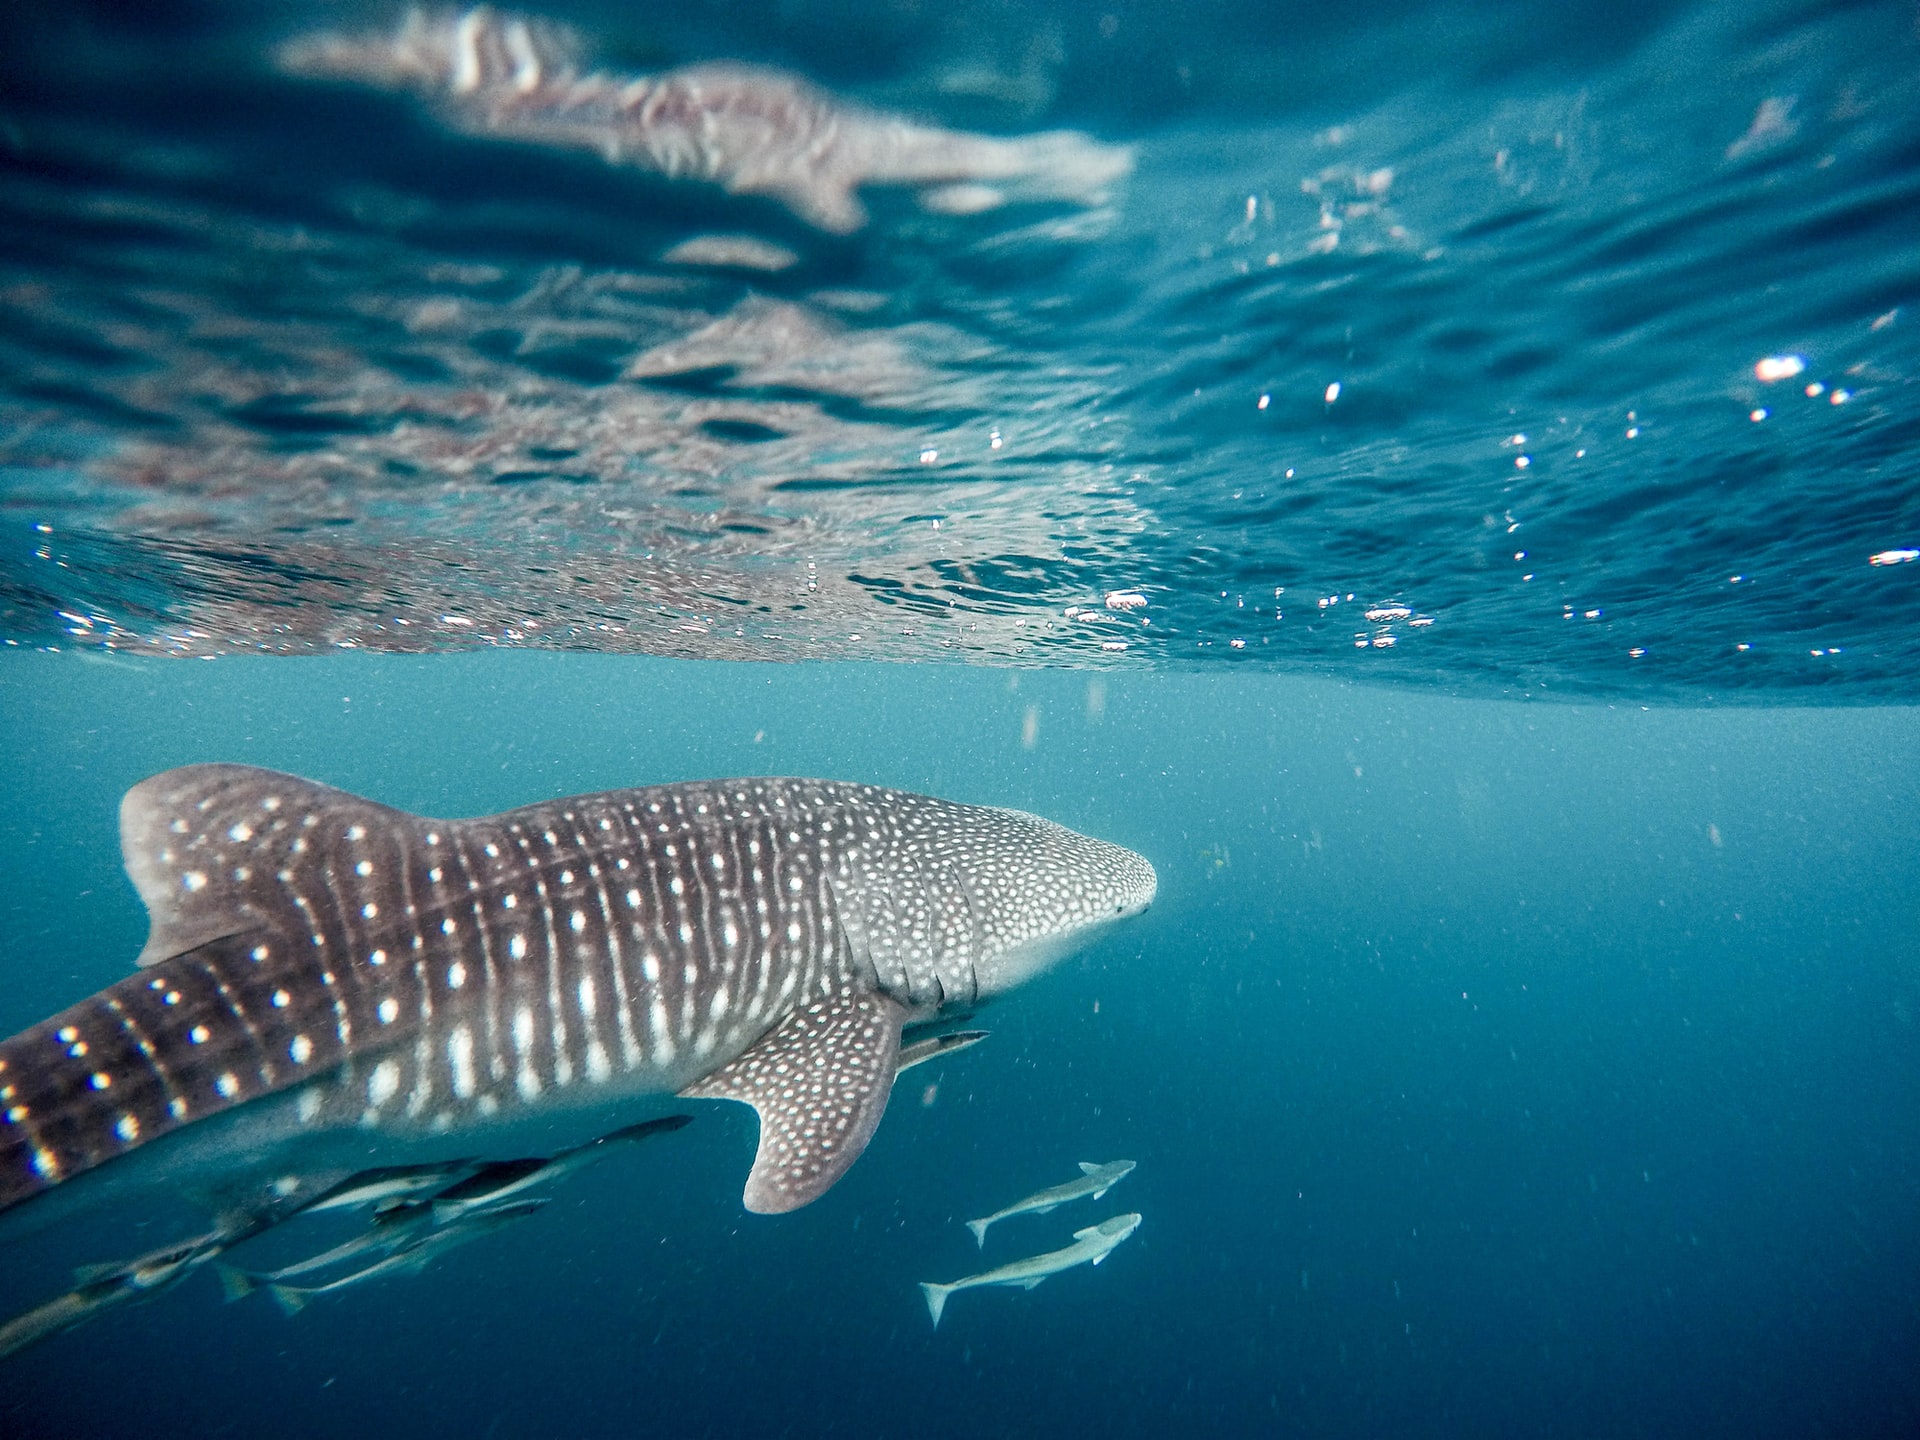 With the exception of the Mediterranean Sea, whale sharks can be found in all temperate and tropical oceans around the world and migrate thousands of miles to different feeding grounds. But moving is slow going, as they move at speeds of little more than 3 miles per hour.